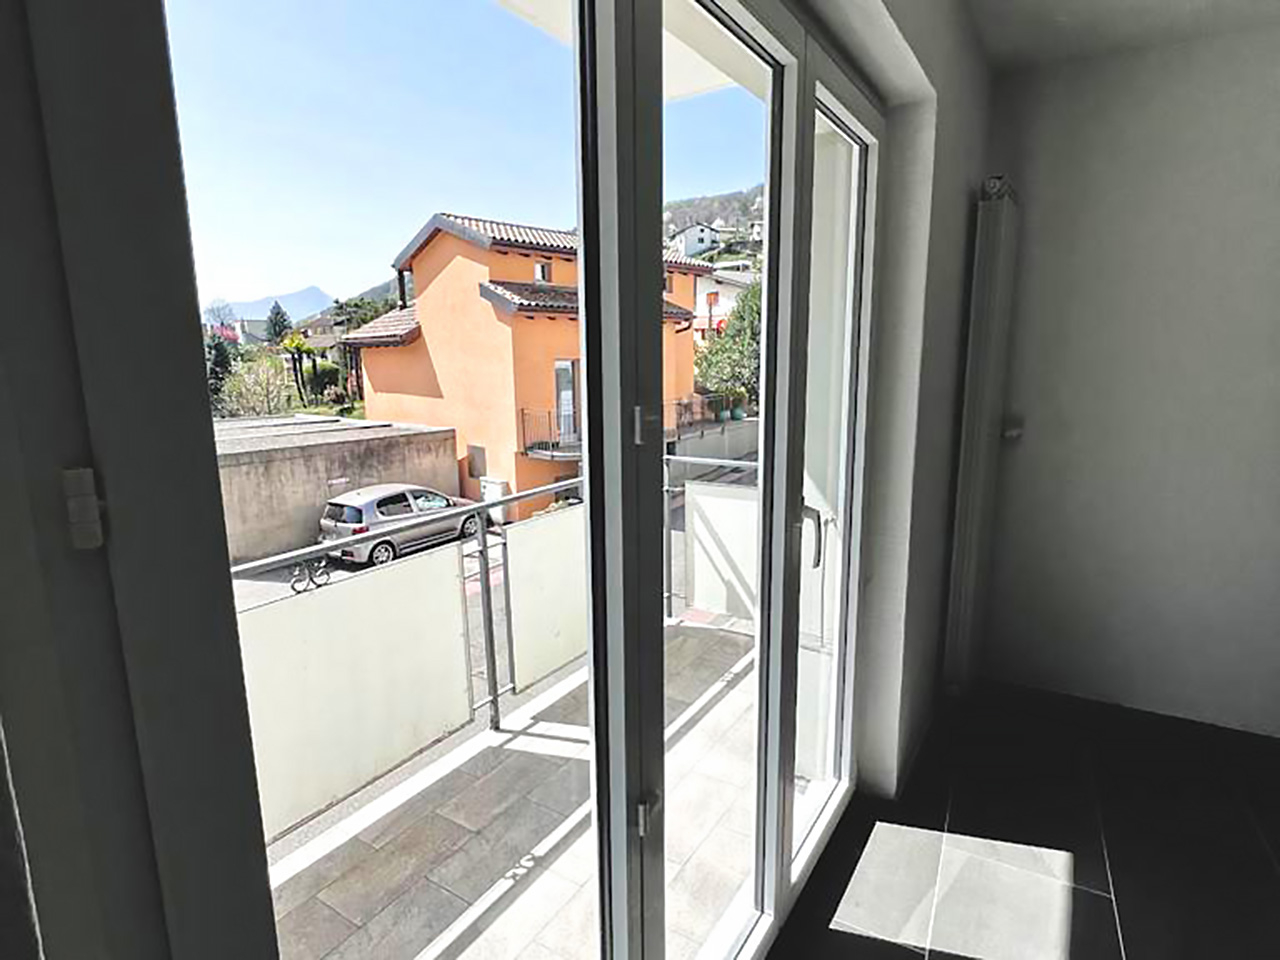 Arogno - Appartement 3.5 rooms - real estate for sale